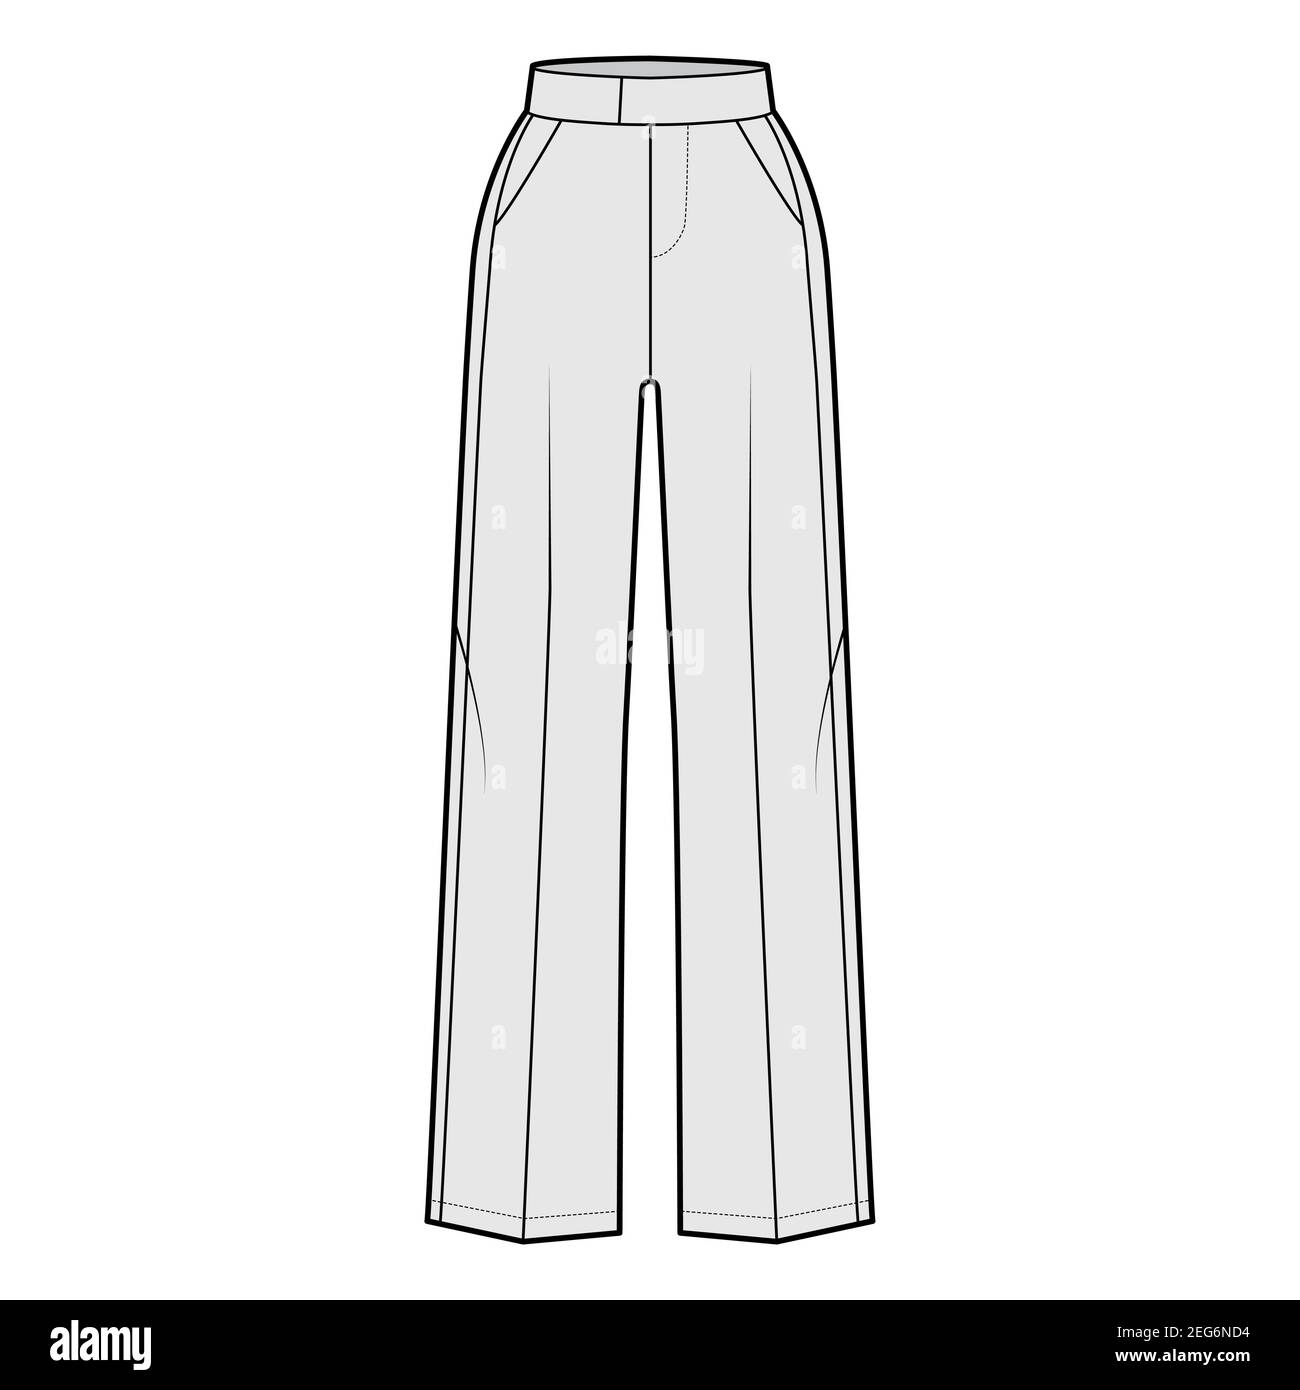 Pants tuxedo technical fashion illustration with extended normal waist, high rise, full length, slant pockets, side satin stripe. Flat trousers bottom template, grey color. Women, men CAD mockup Stock Vector